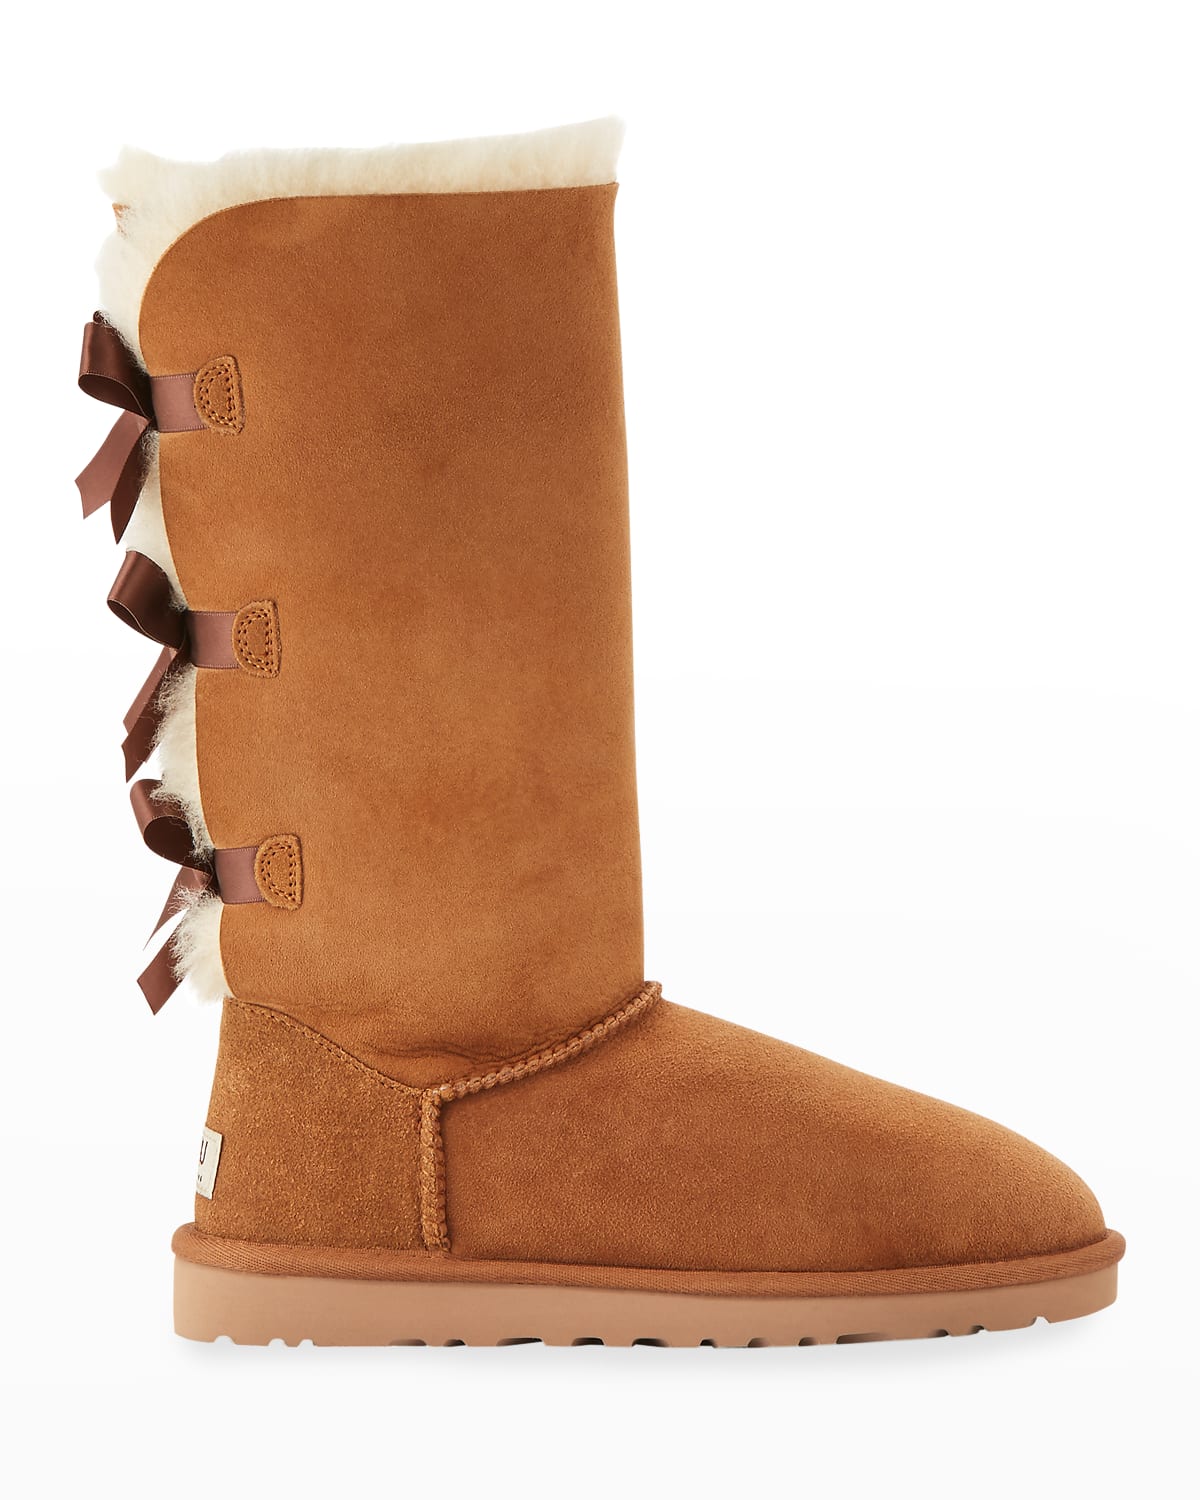 Bailey Bow Tall Shearling Fur Boots